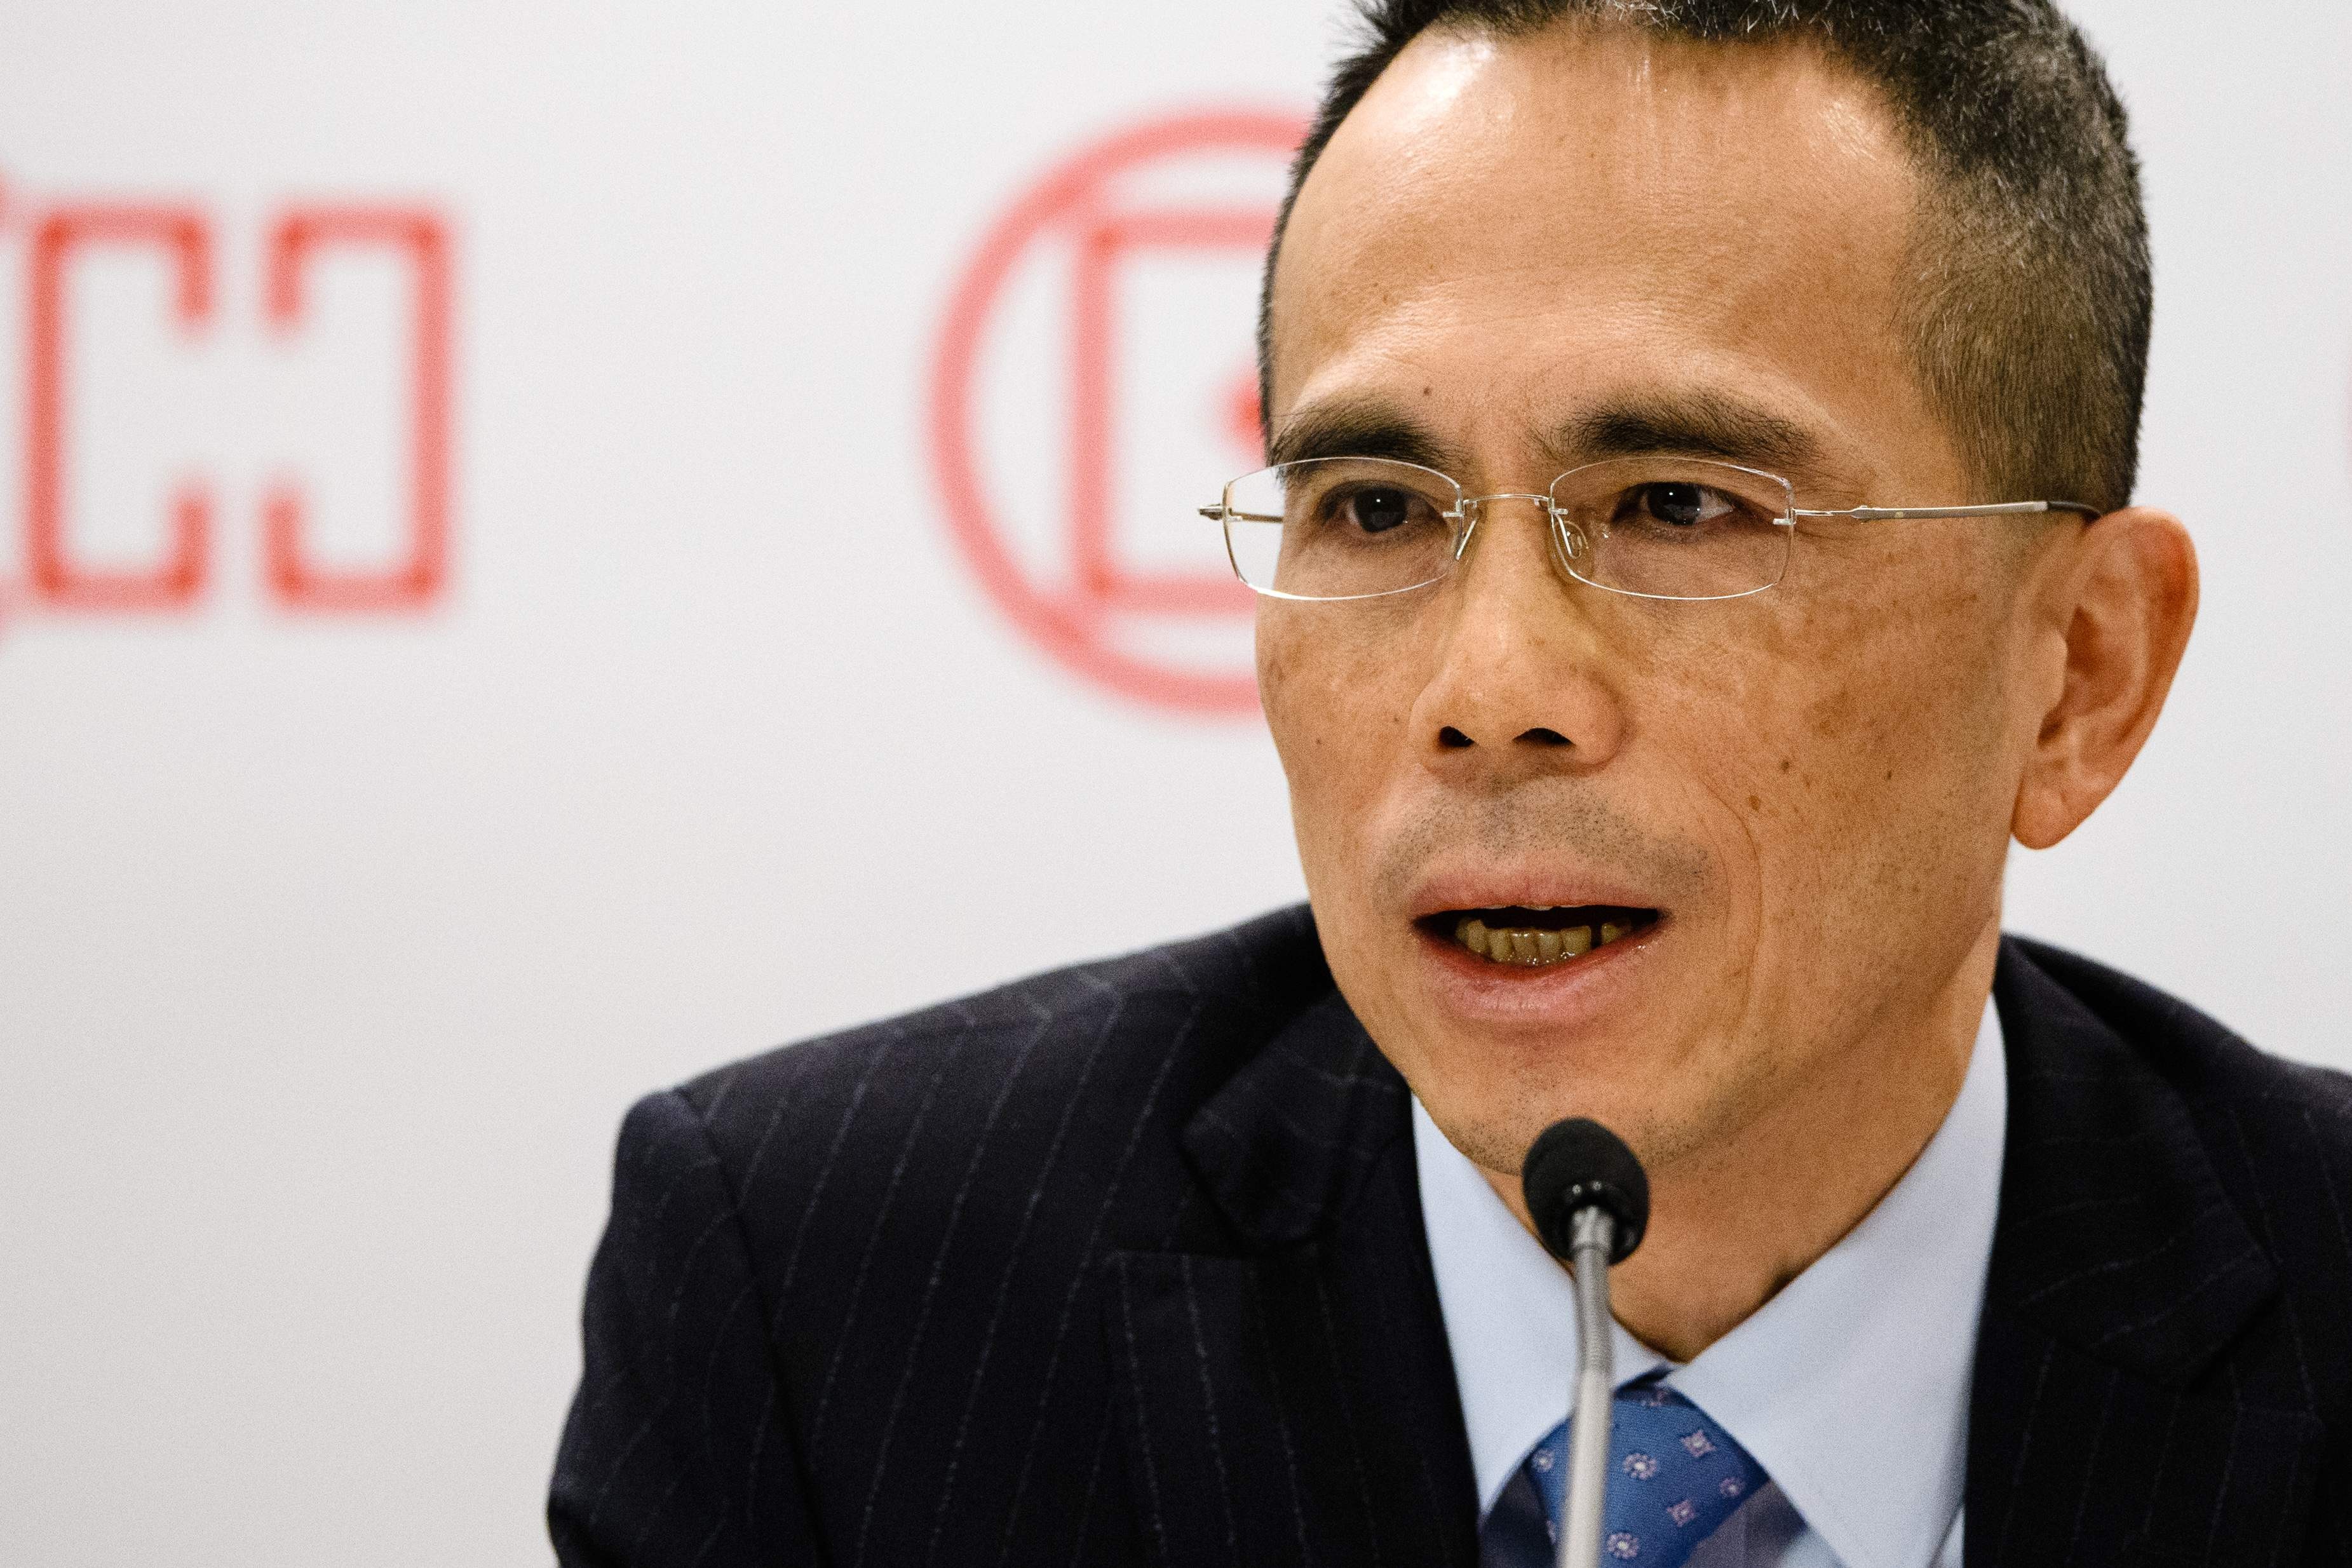 Victor Li, son of Hong Kong’s richest man Li Ka-shing, speaks during a press conference in Hong Kong on Friday. Li Ka-shing announced he was stepping down as chairman of his flagship company CK Hutchison, and will hand over the reins to Victor. Photo: AFP